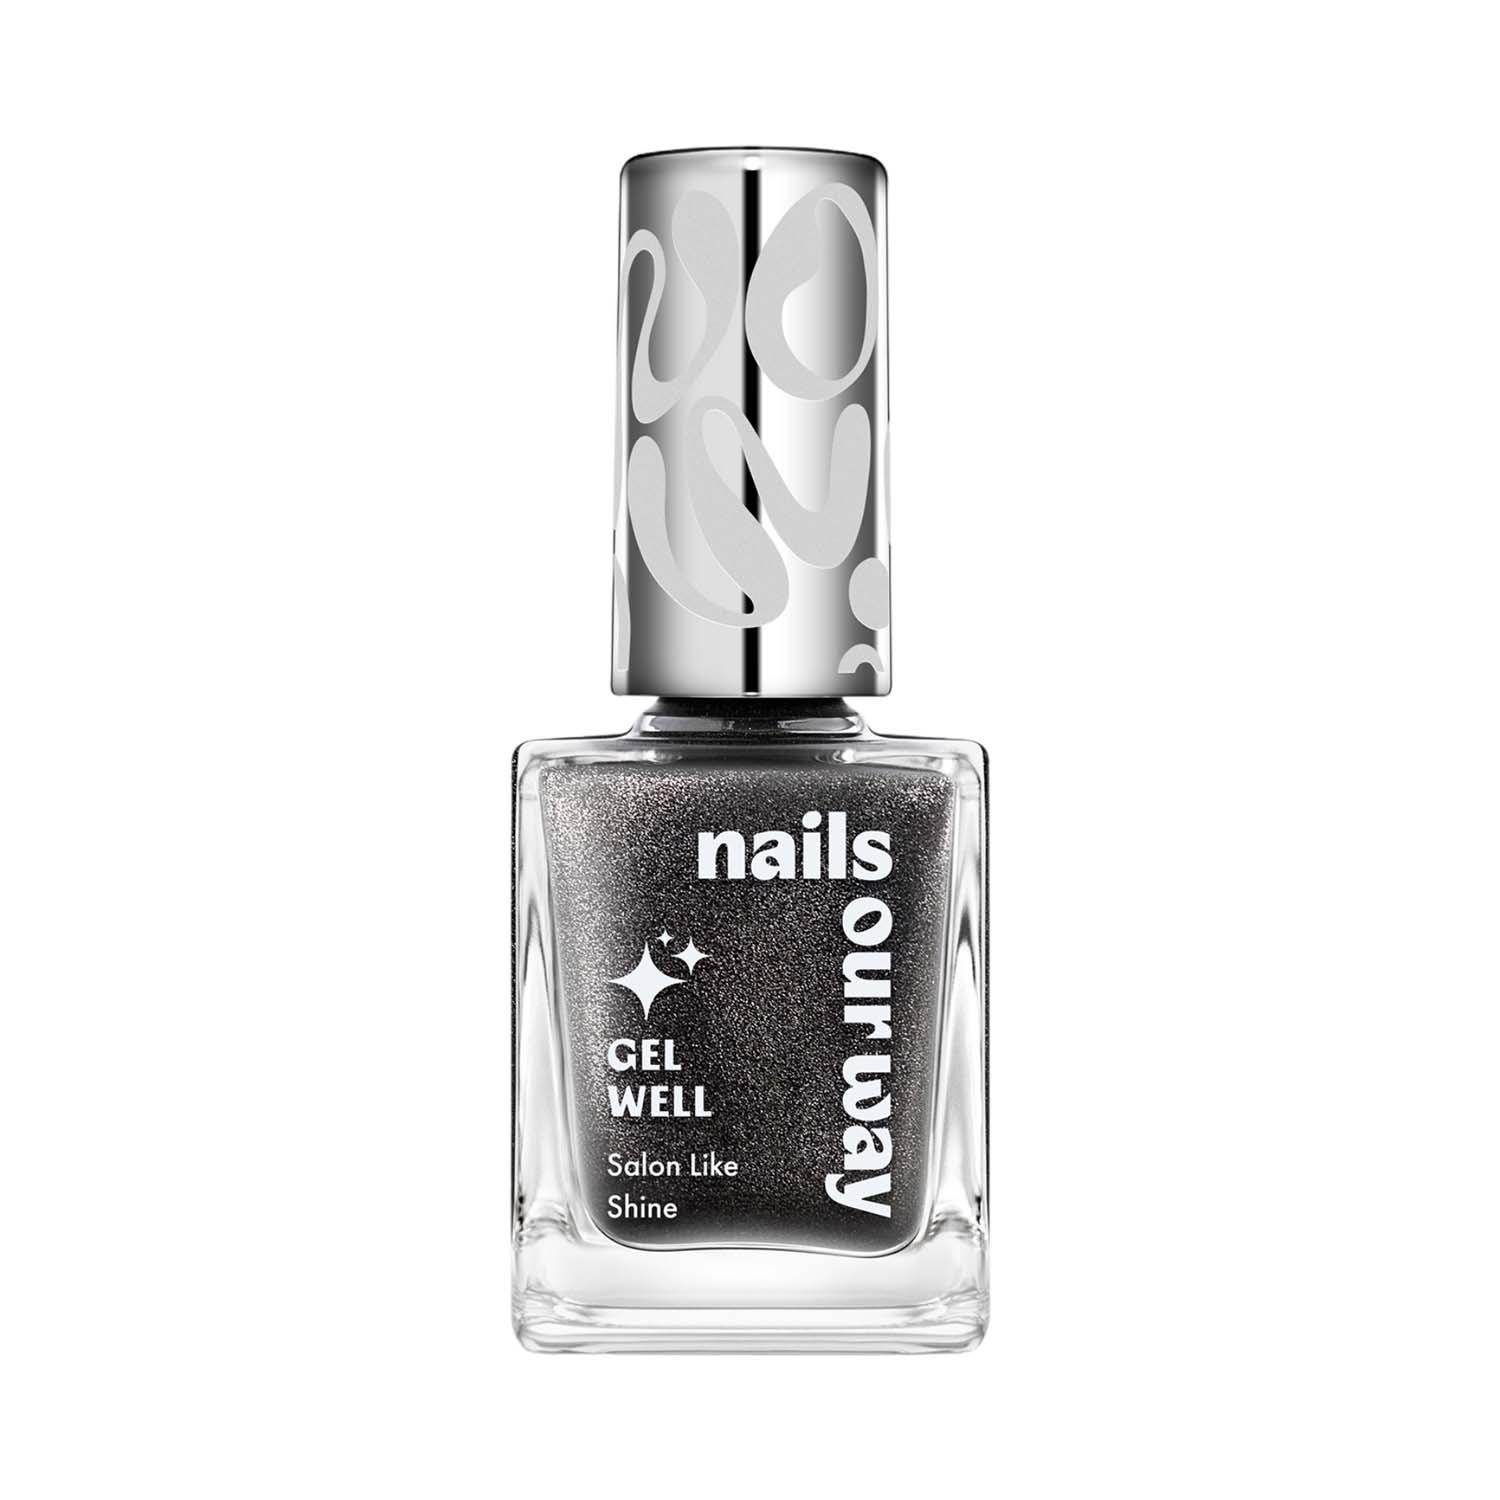 Nails Our Way | Nails Our Way Gel Well Nail Enamel - 705 Enchanting (10 ml)